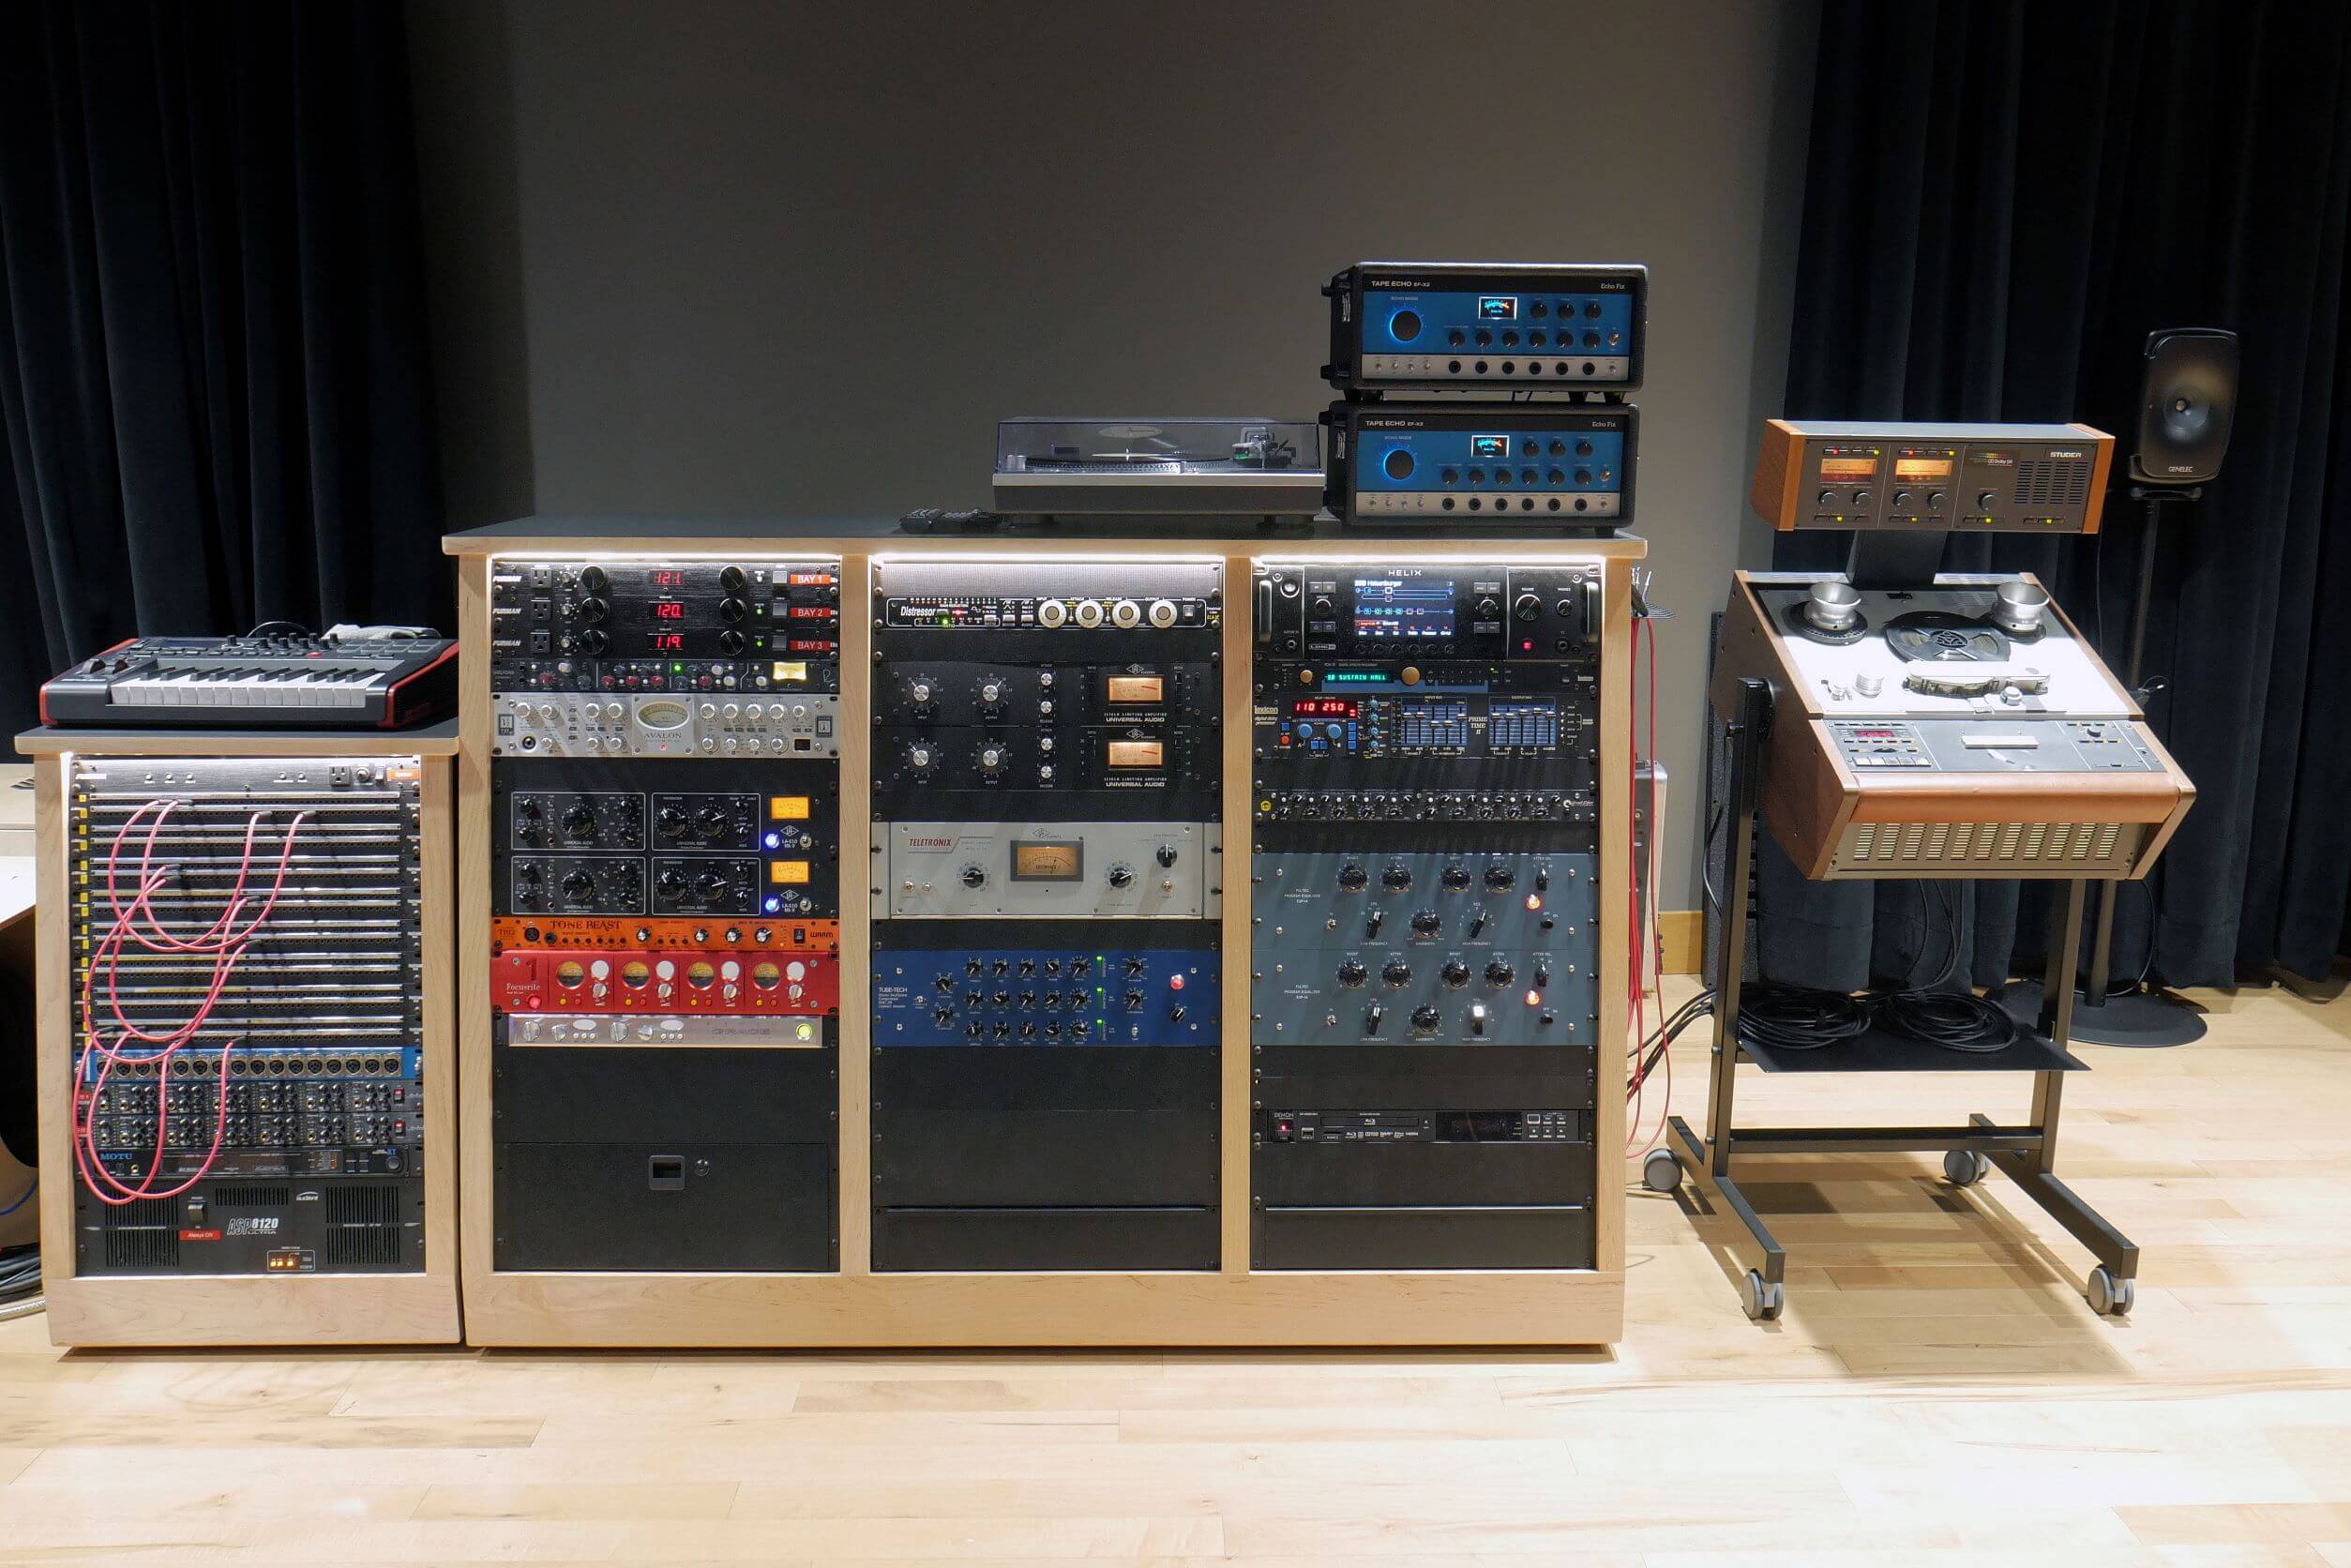 Racks in the classroom sized control room